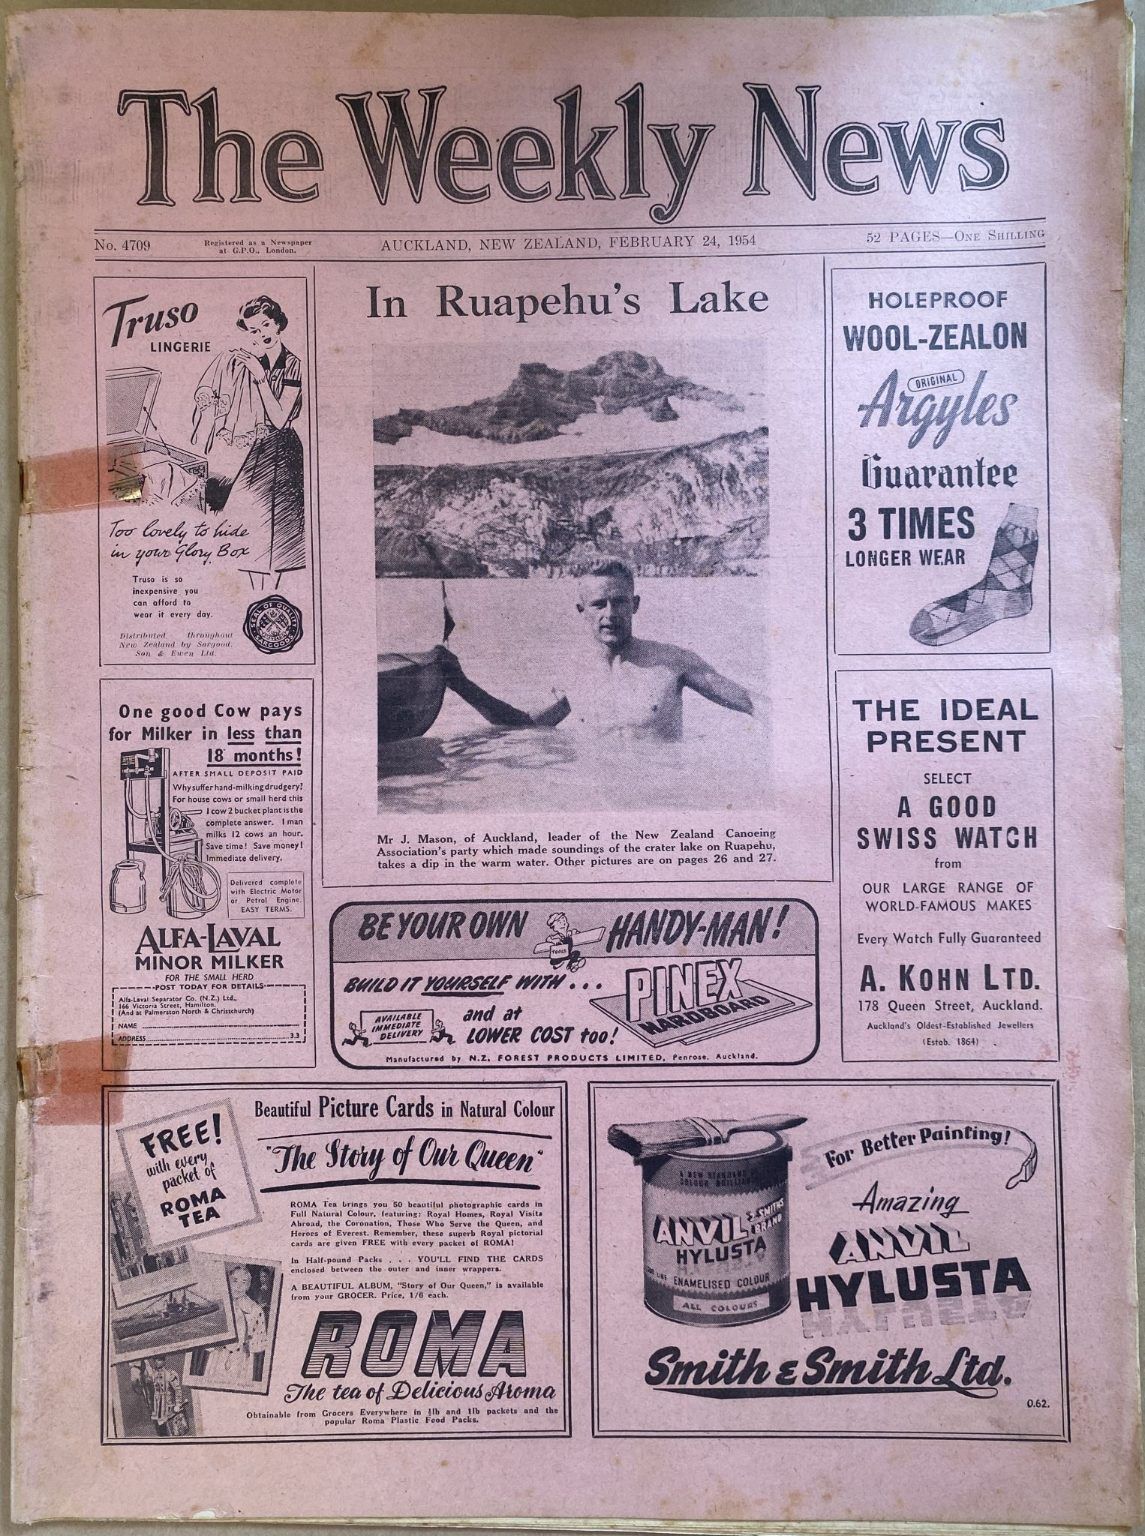 OLD NEWSPAPER: The Weekly News - No. 4709, 24 February 1954